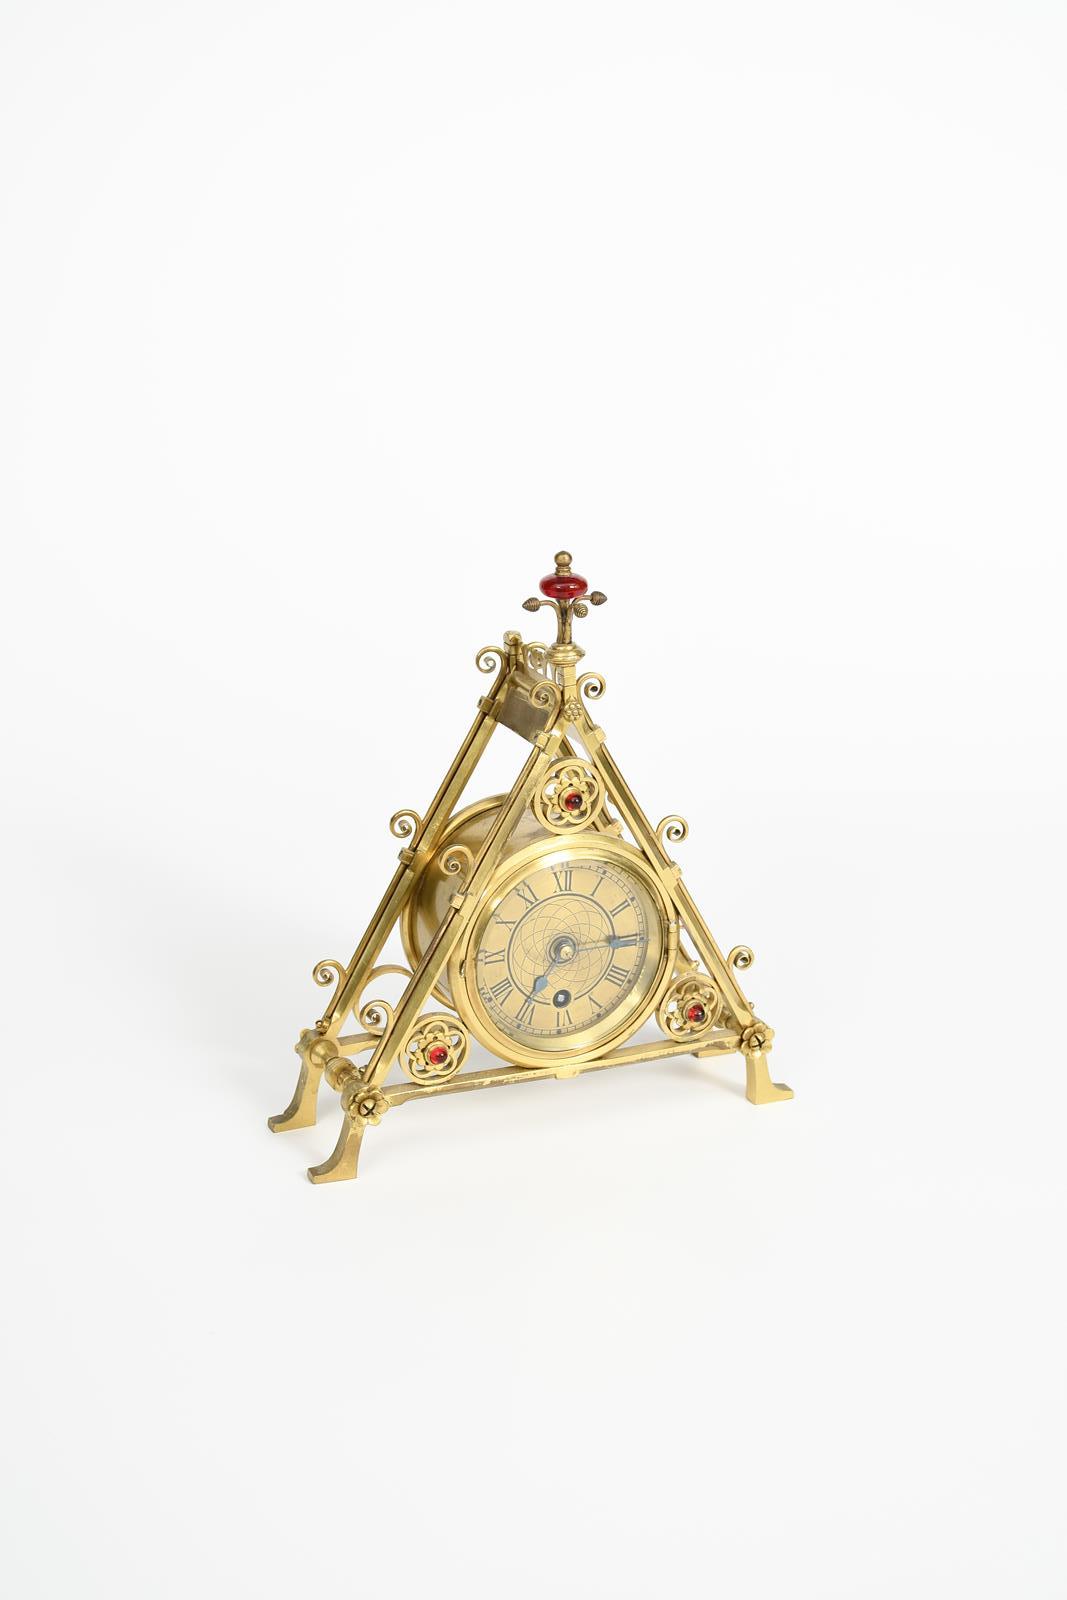 A rare Reformed Gothic brass mantel clock designed by Bruce Talbert, probably manufactured by - Image 3 of 3